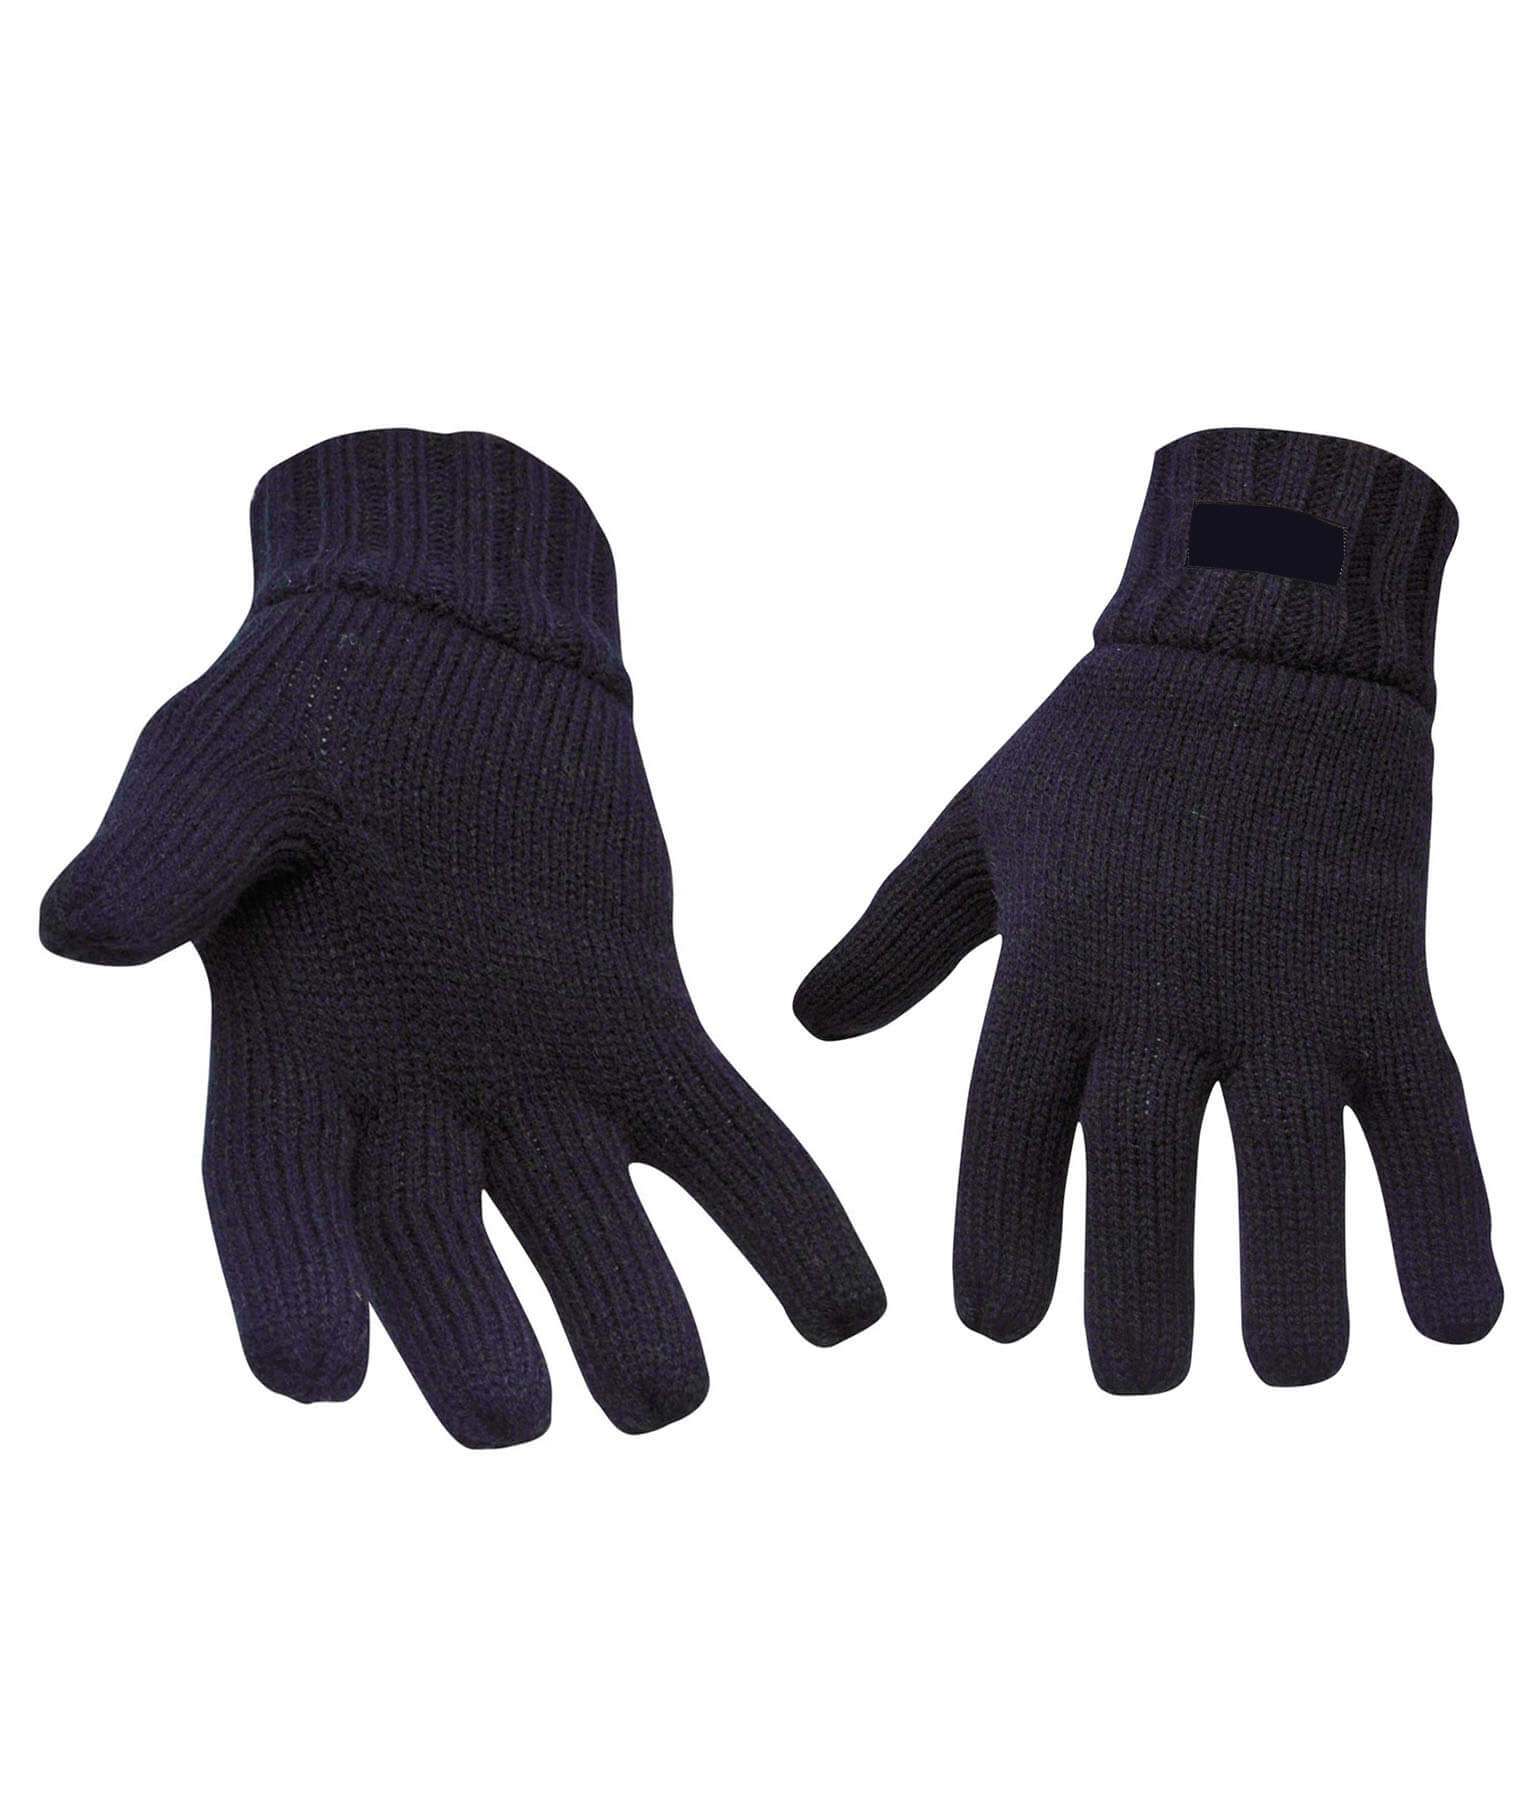 KNIT GLOVE INSULATEX LINED